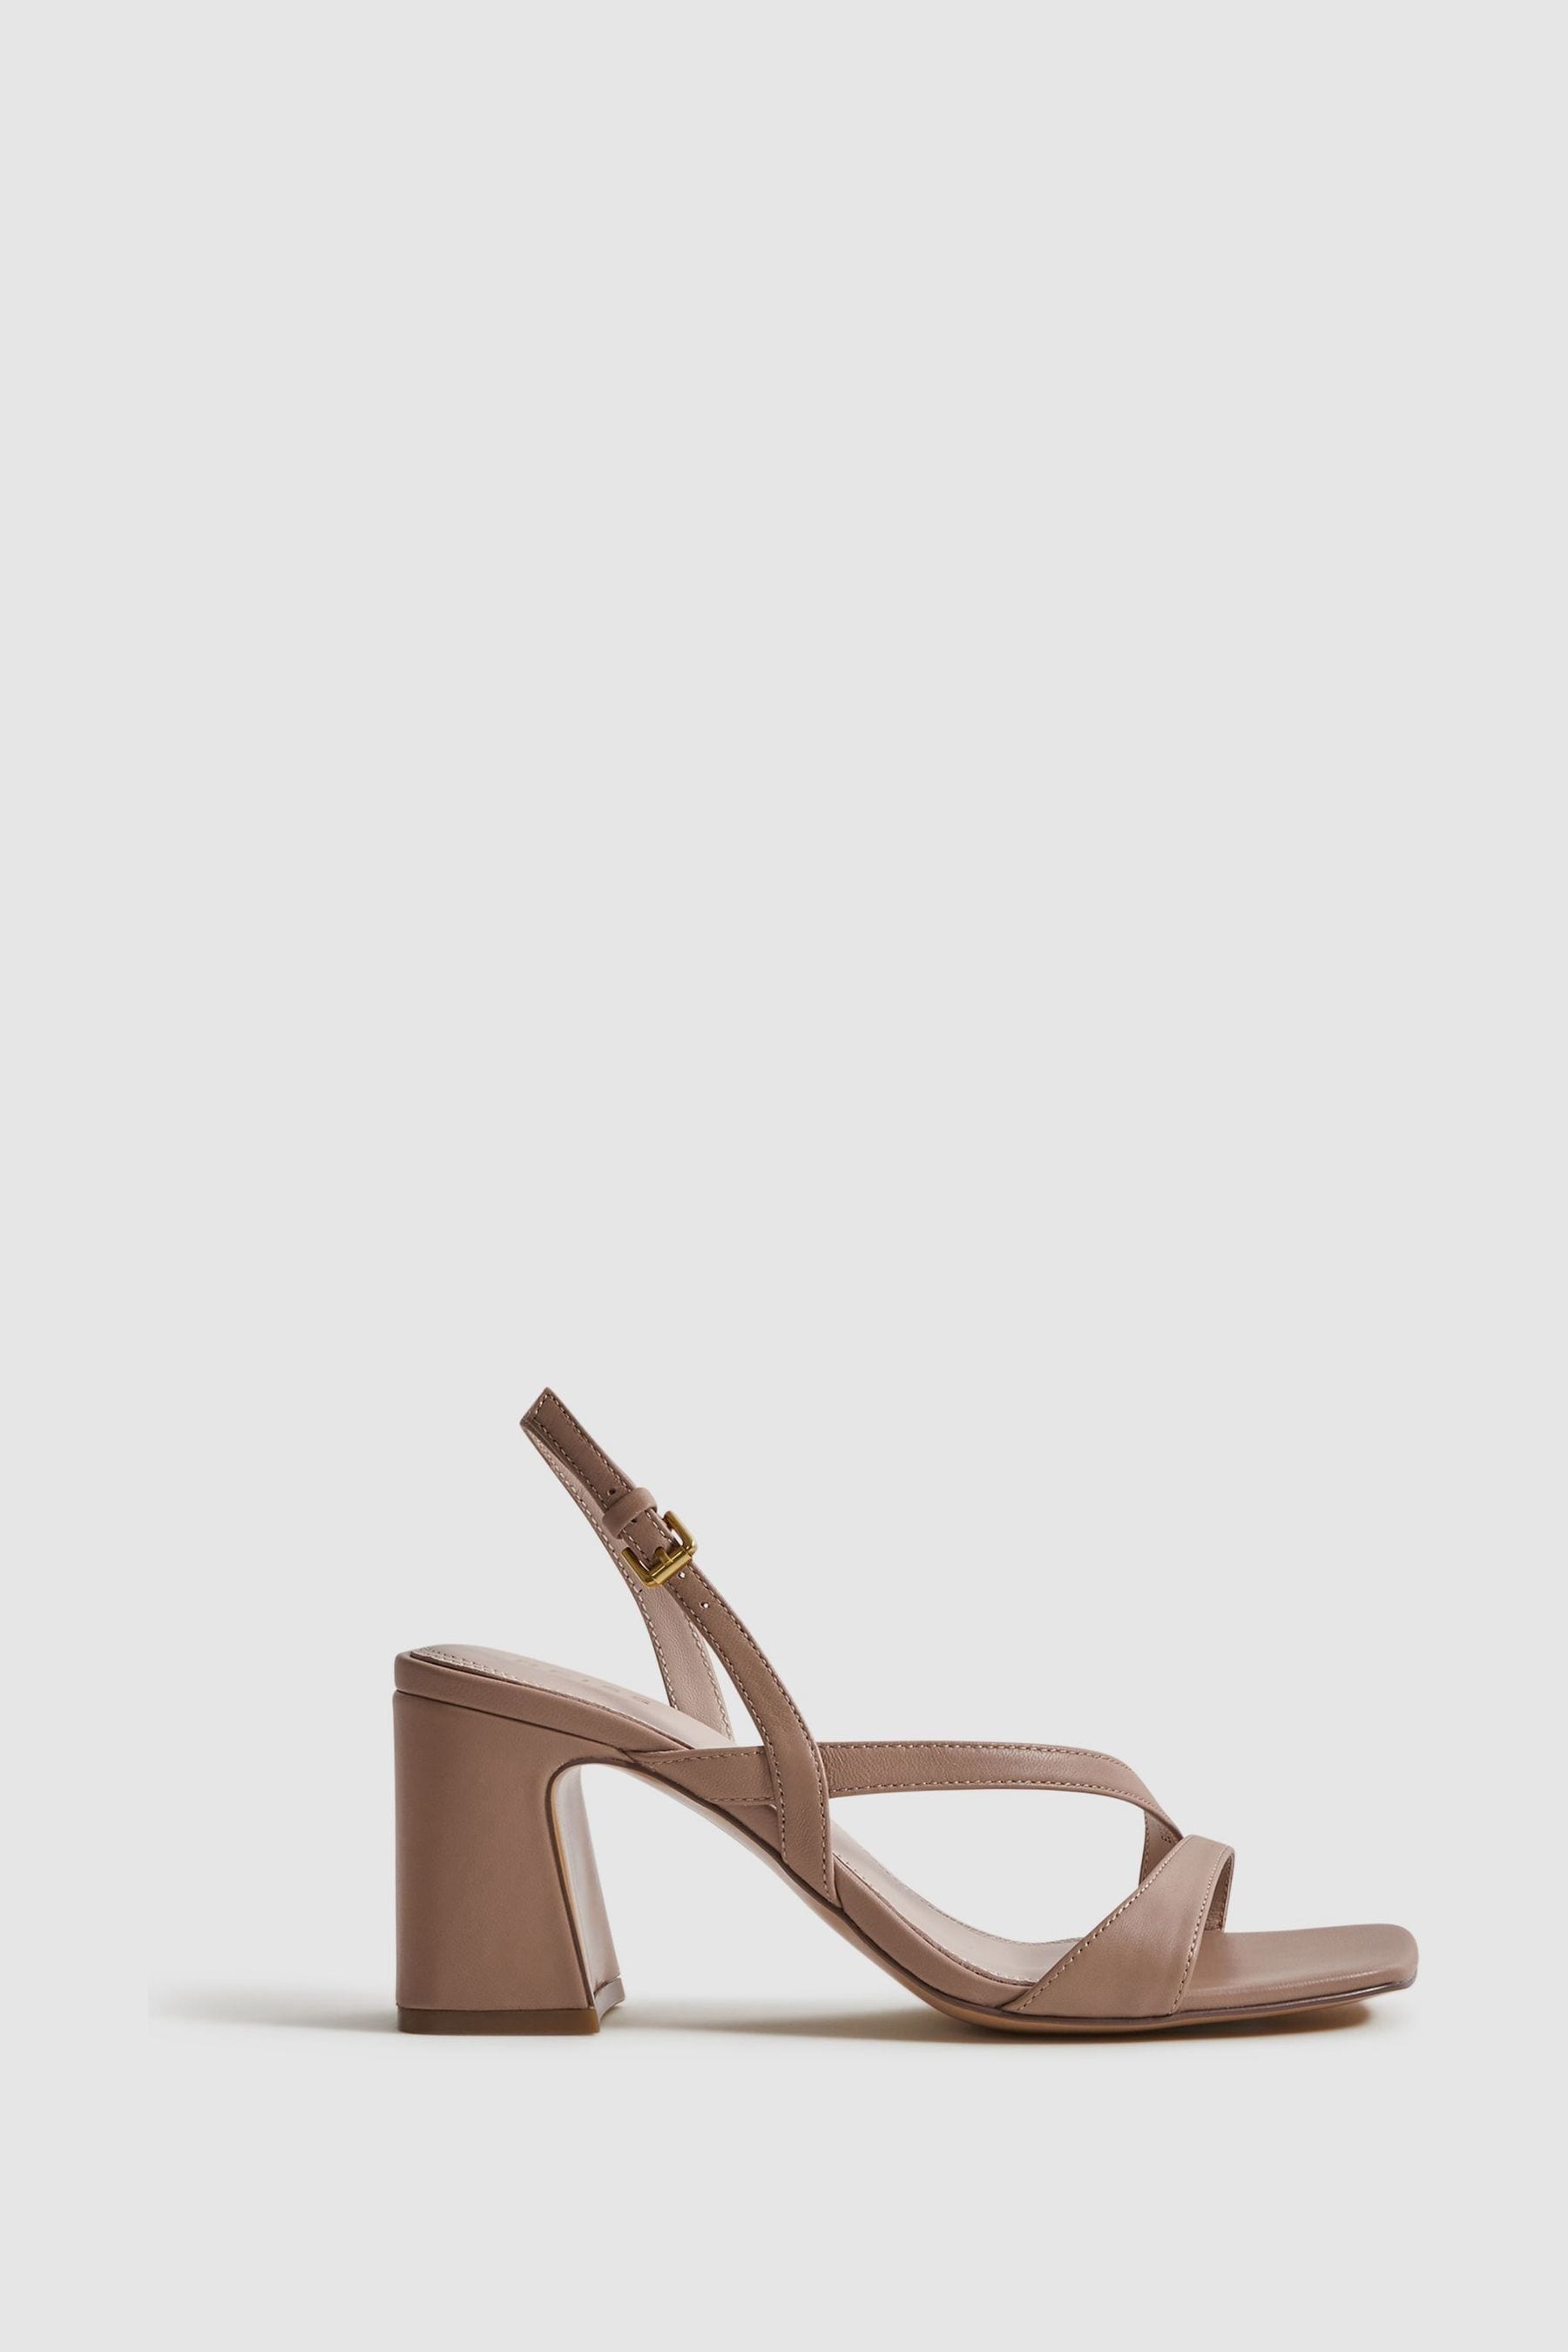 Reiss Alice - Nude Strappy Leather Heeled Sandals, Uk 5 Eu 38